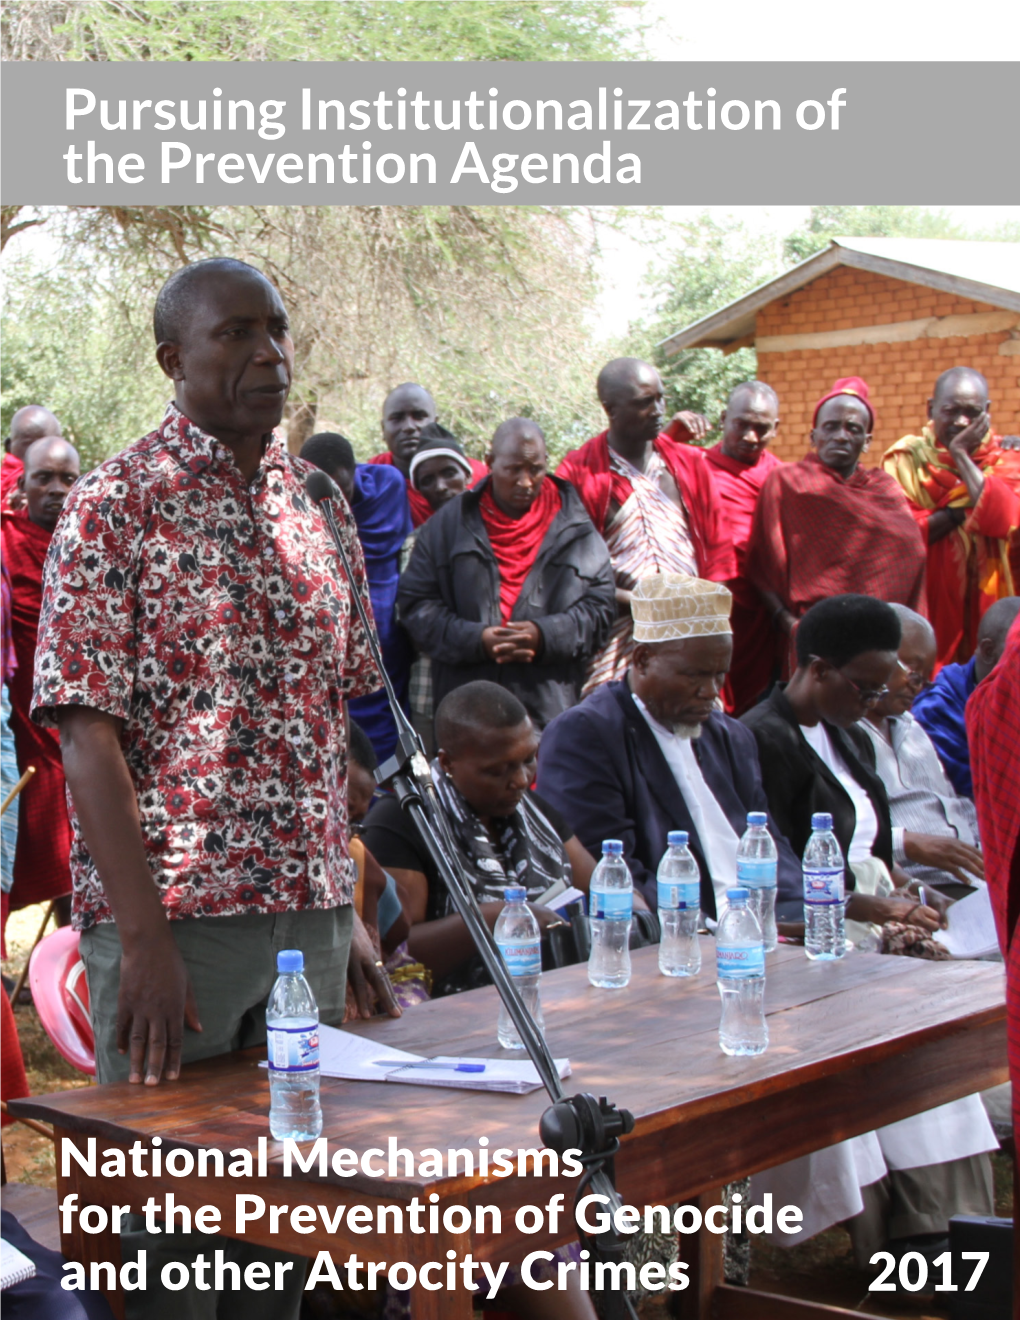 National Mechanisms for the Prevention Of